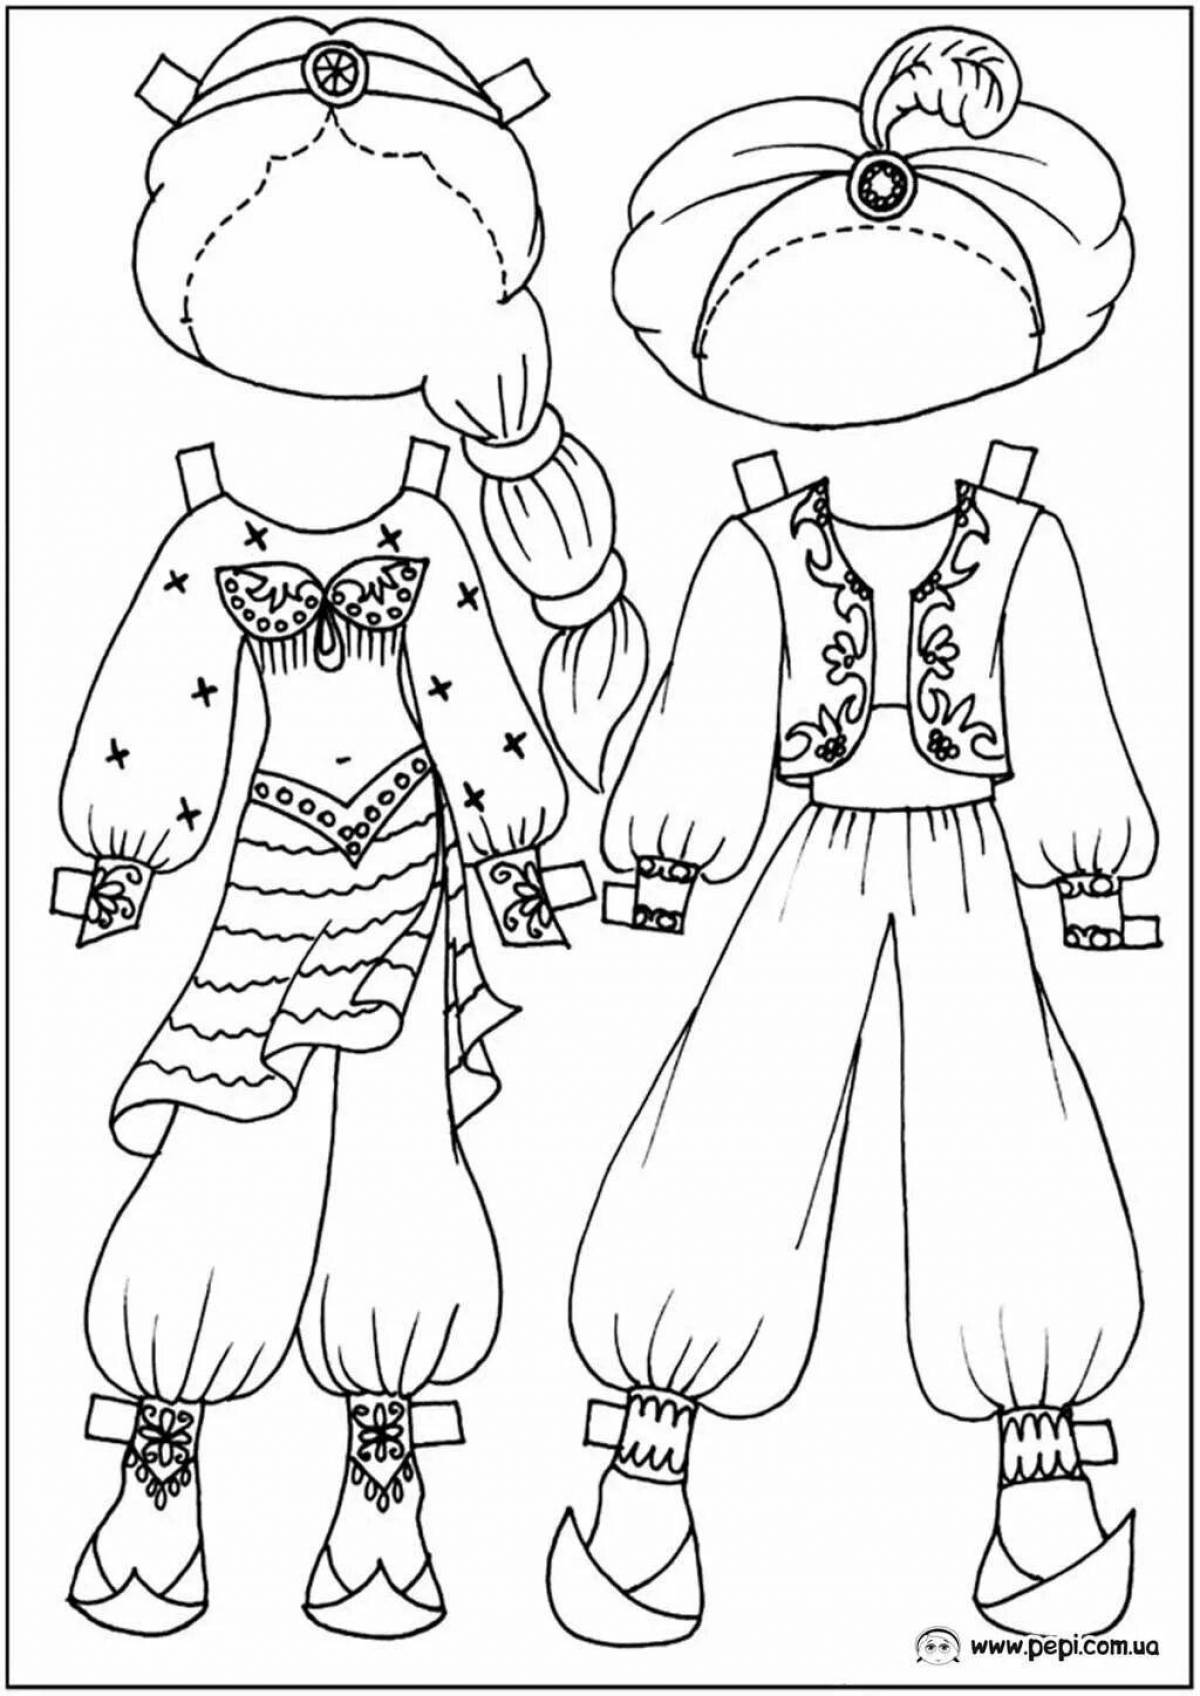 Coloring page for a fascinating carnival costume